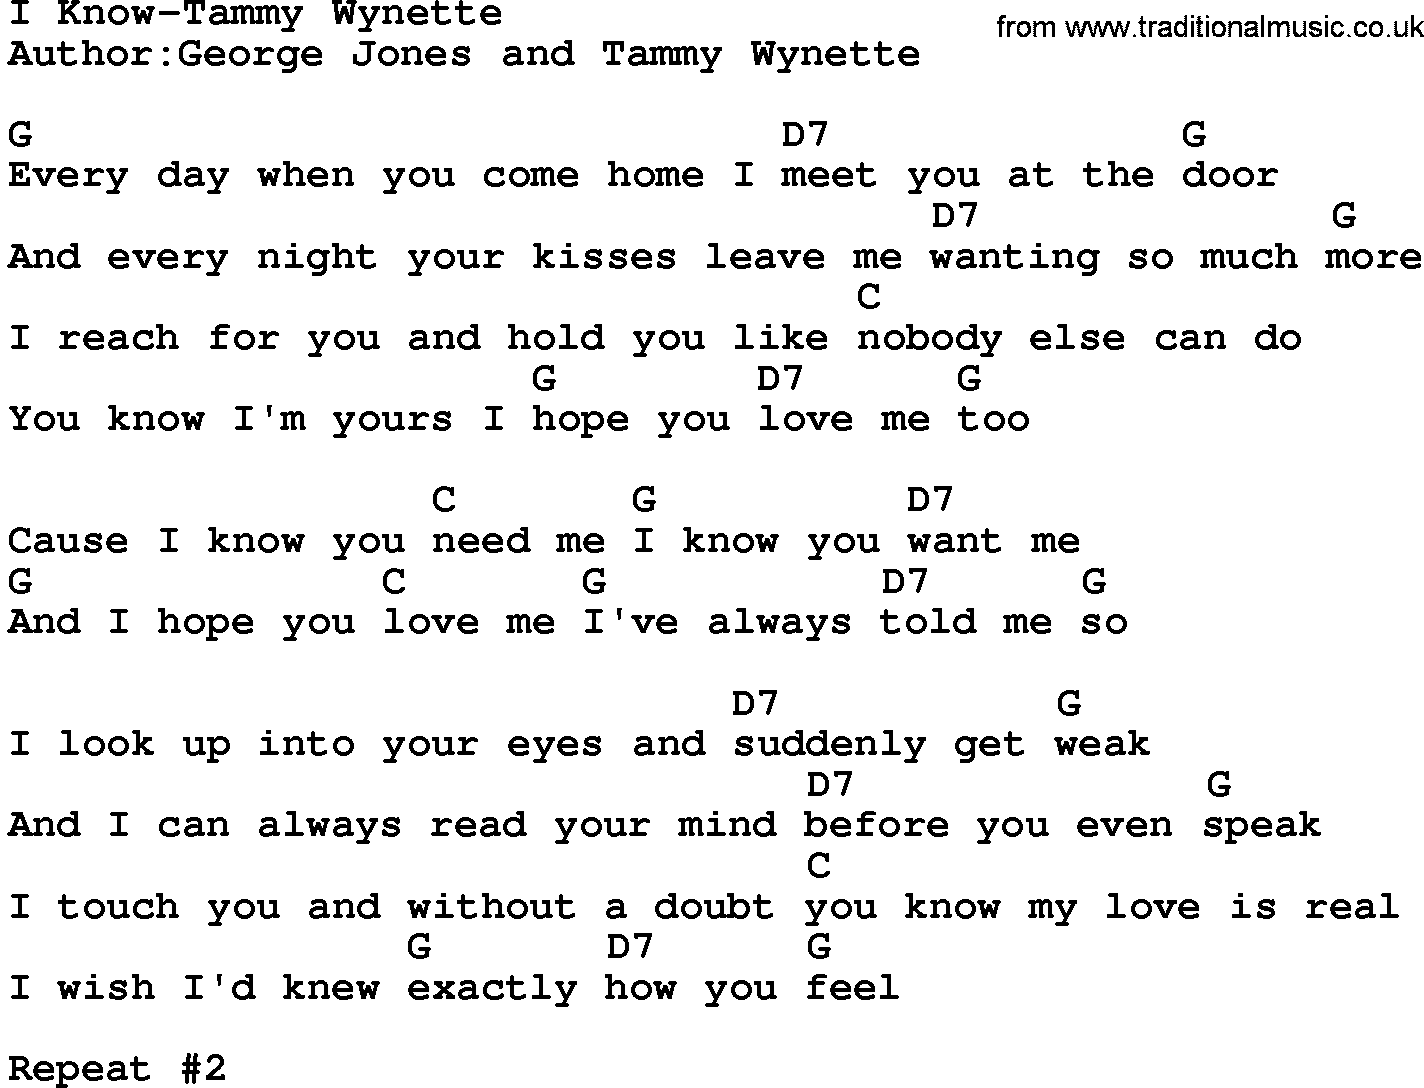 Country music song: I Know-Tammy Wynette lyrics and chords